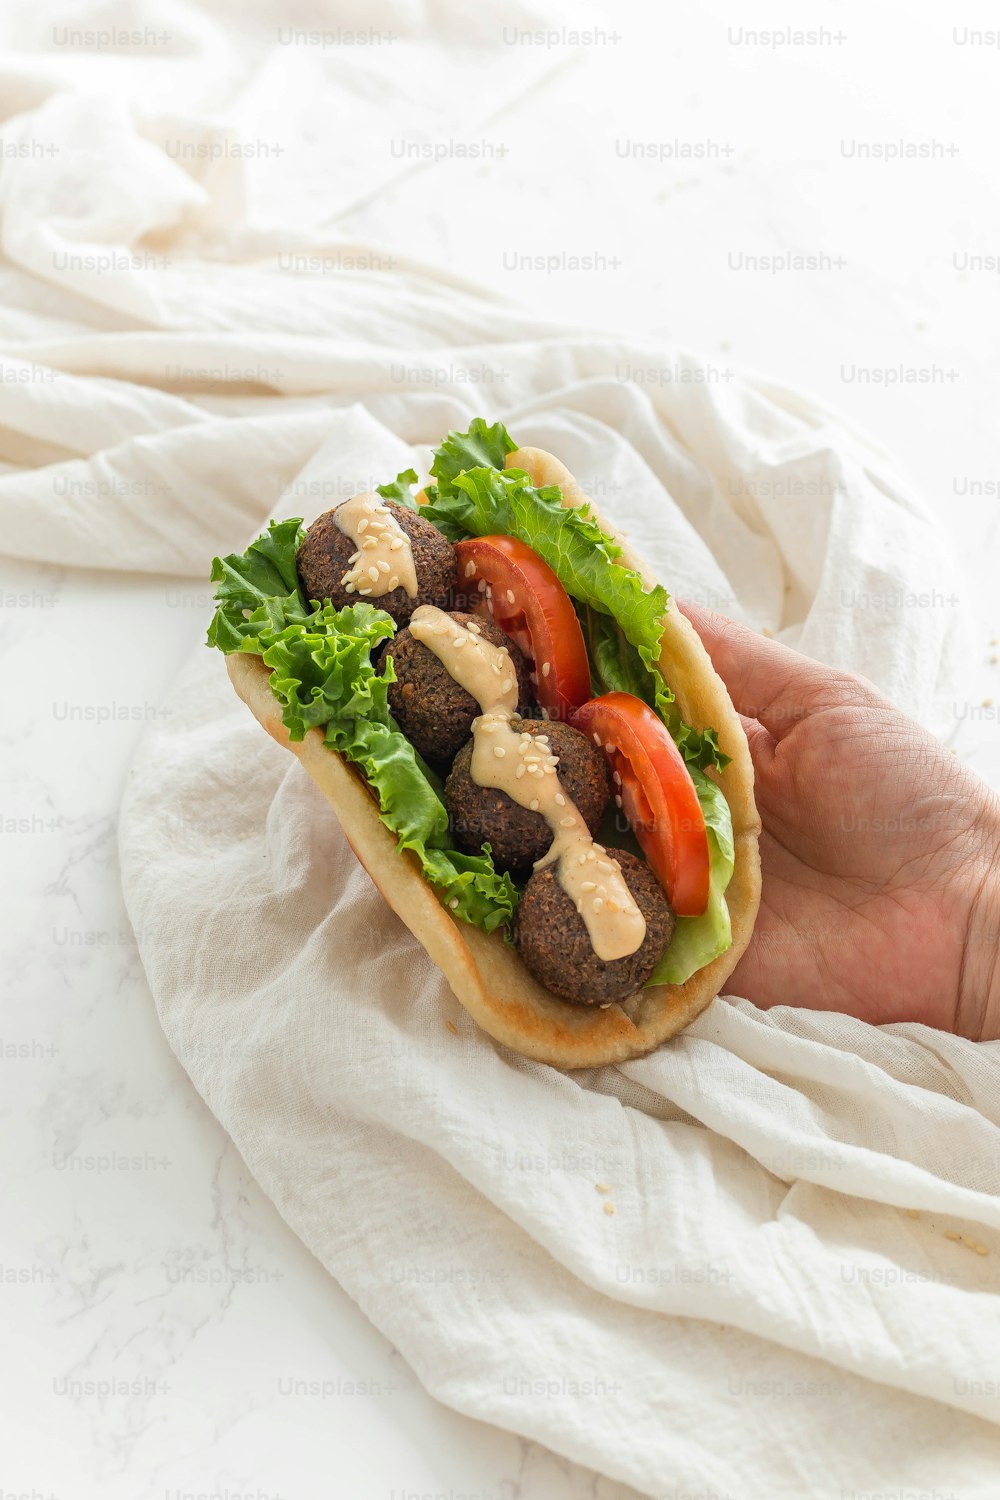 a hand holding a sandwich with meat, lettuce and tomatoes